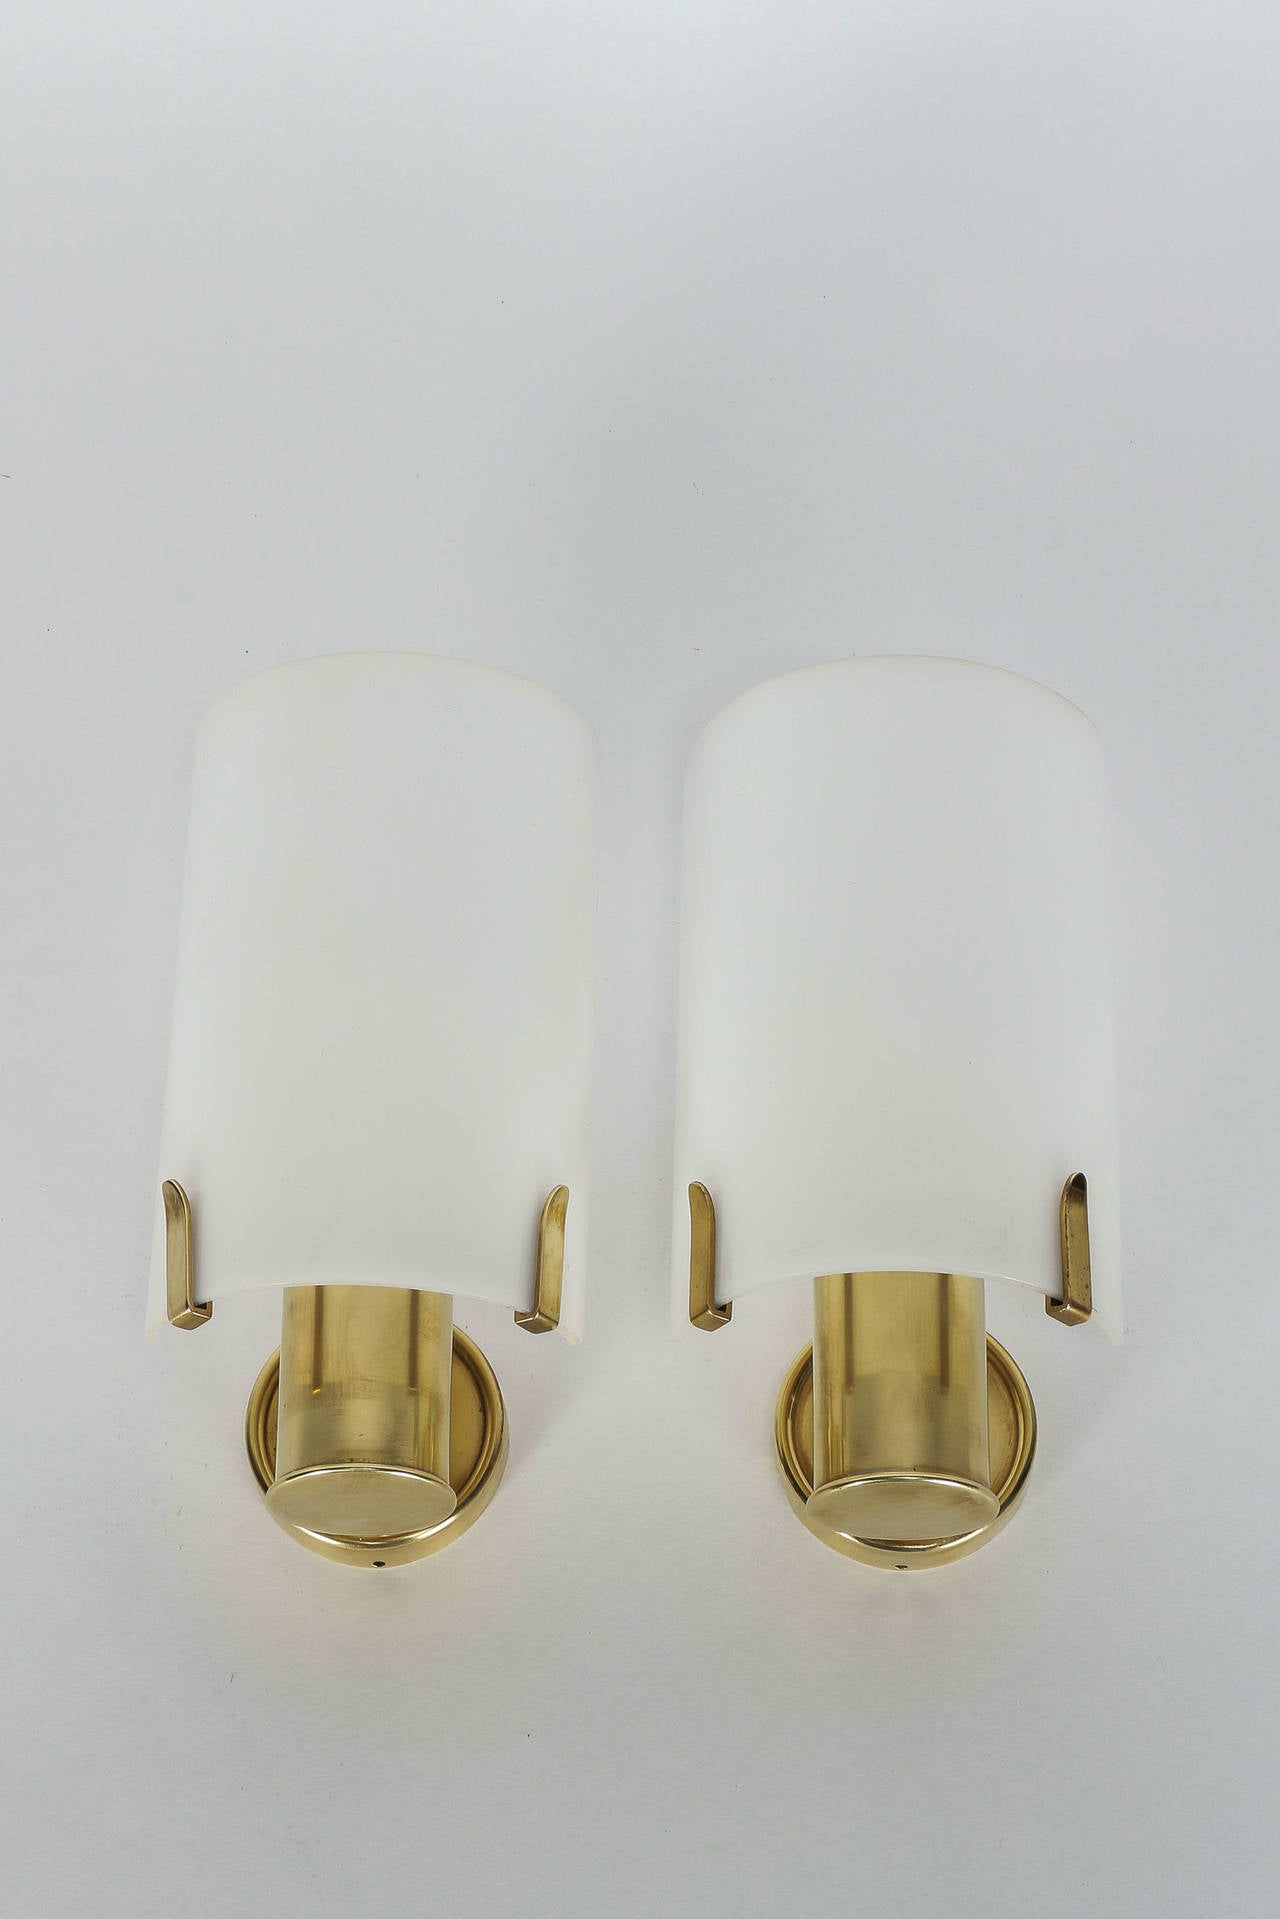 Pair of swiss brass wall lamps from the 1960's. Lovely details, very warm light